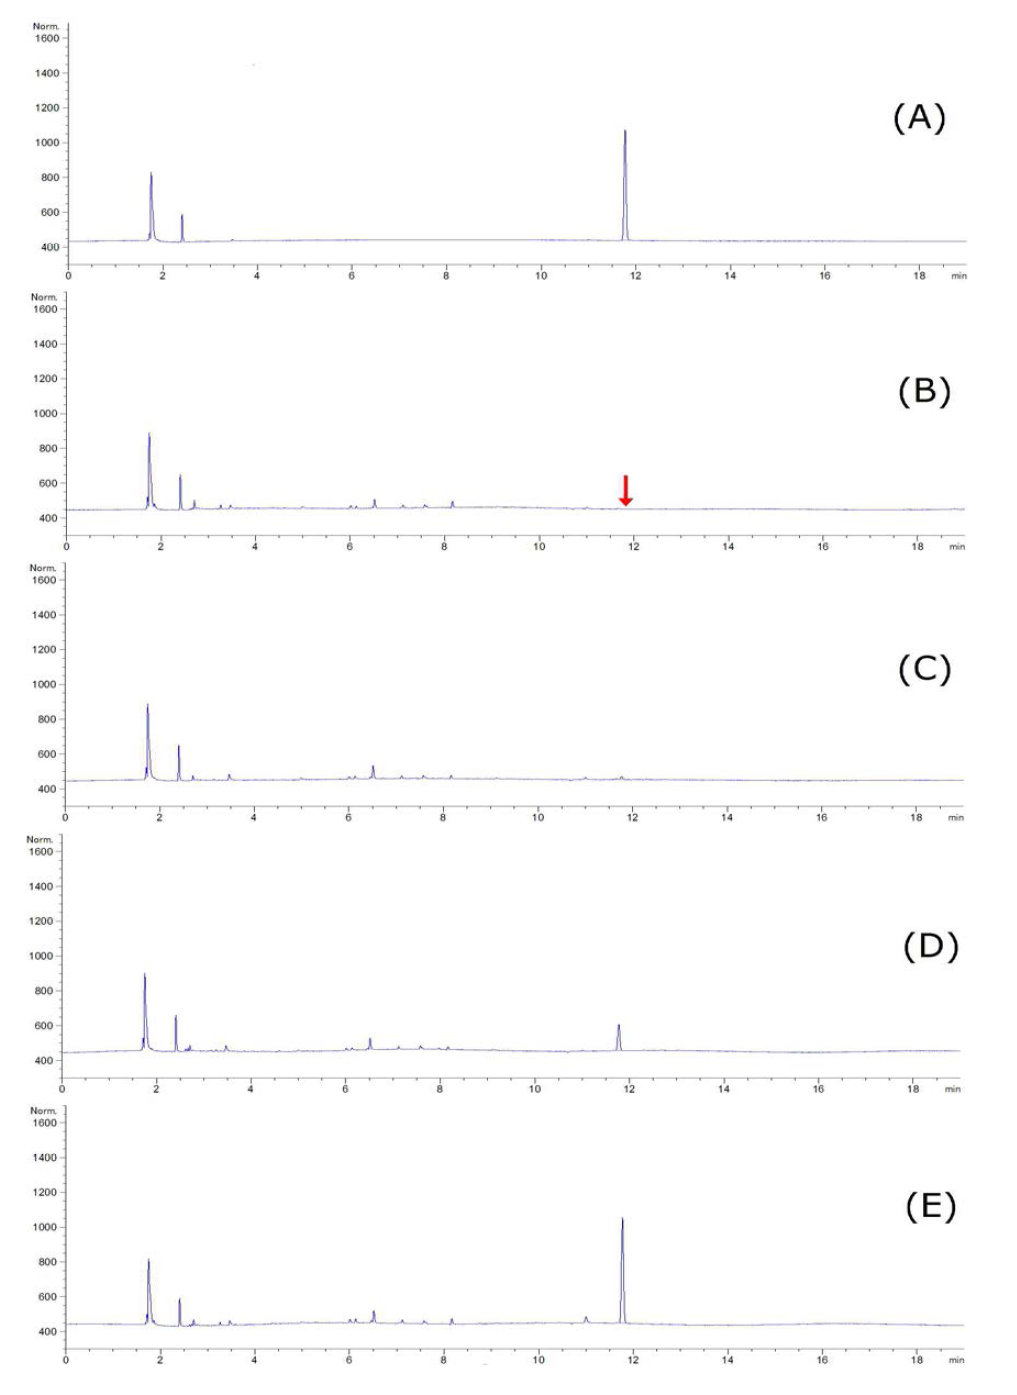 GC-ECD chromatograms corresponding to: A, standard solution at 0.5 mg/kg; B, control pepper; C, spiked at 0.01 mg/kg; D, spiked at 0.1 mg/kg; and E, spiked at 0.5 mg/kg